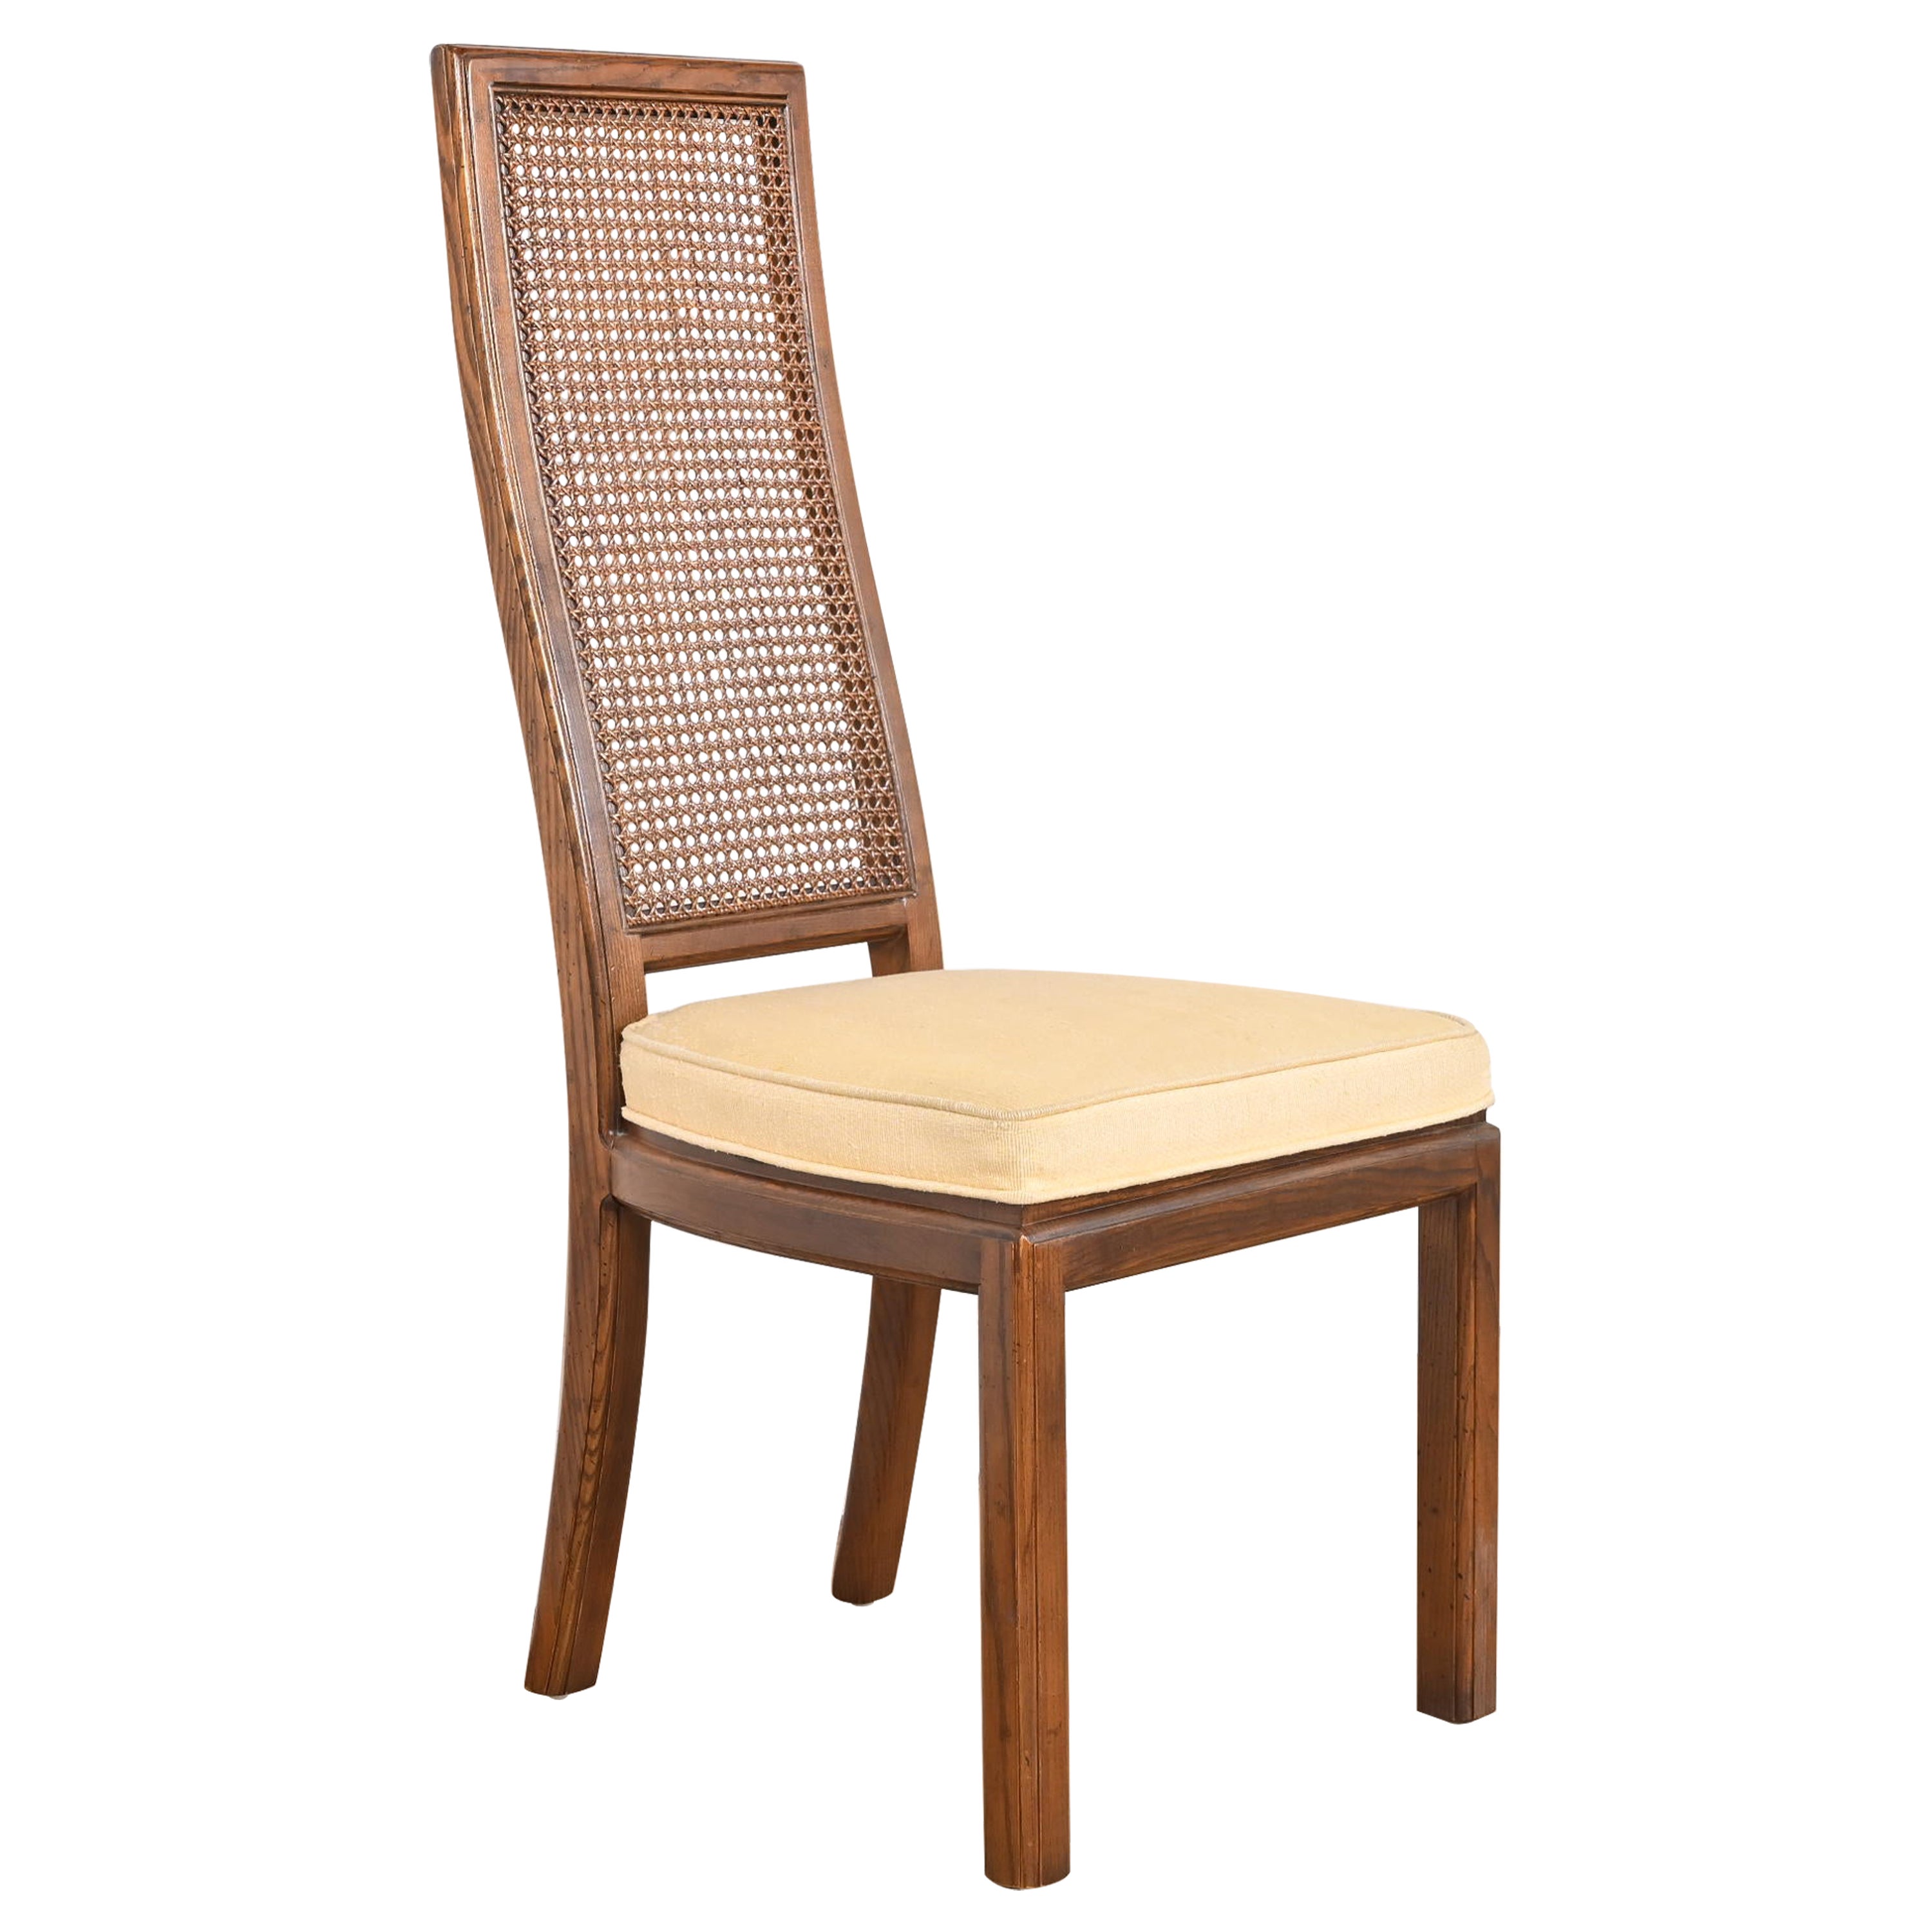 Henredon Mid-Century Modern Oak and Cane High Back Side Chair, Circa 1970s For Sale